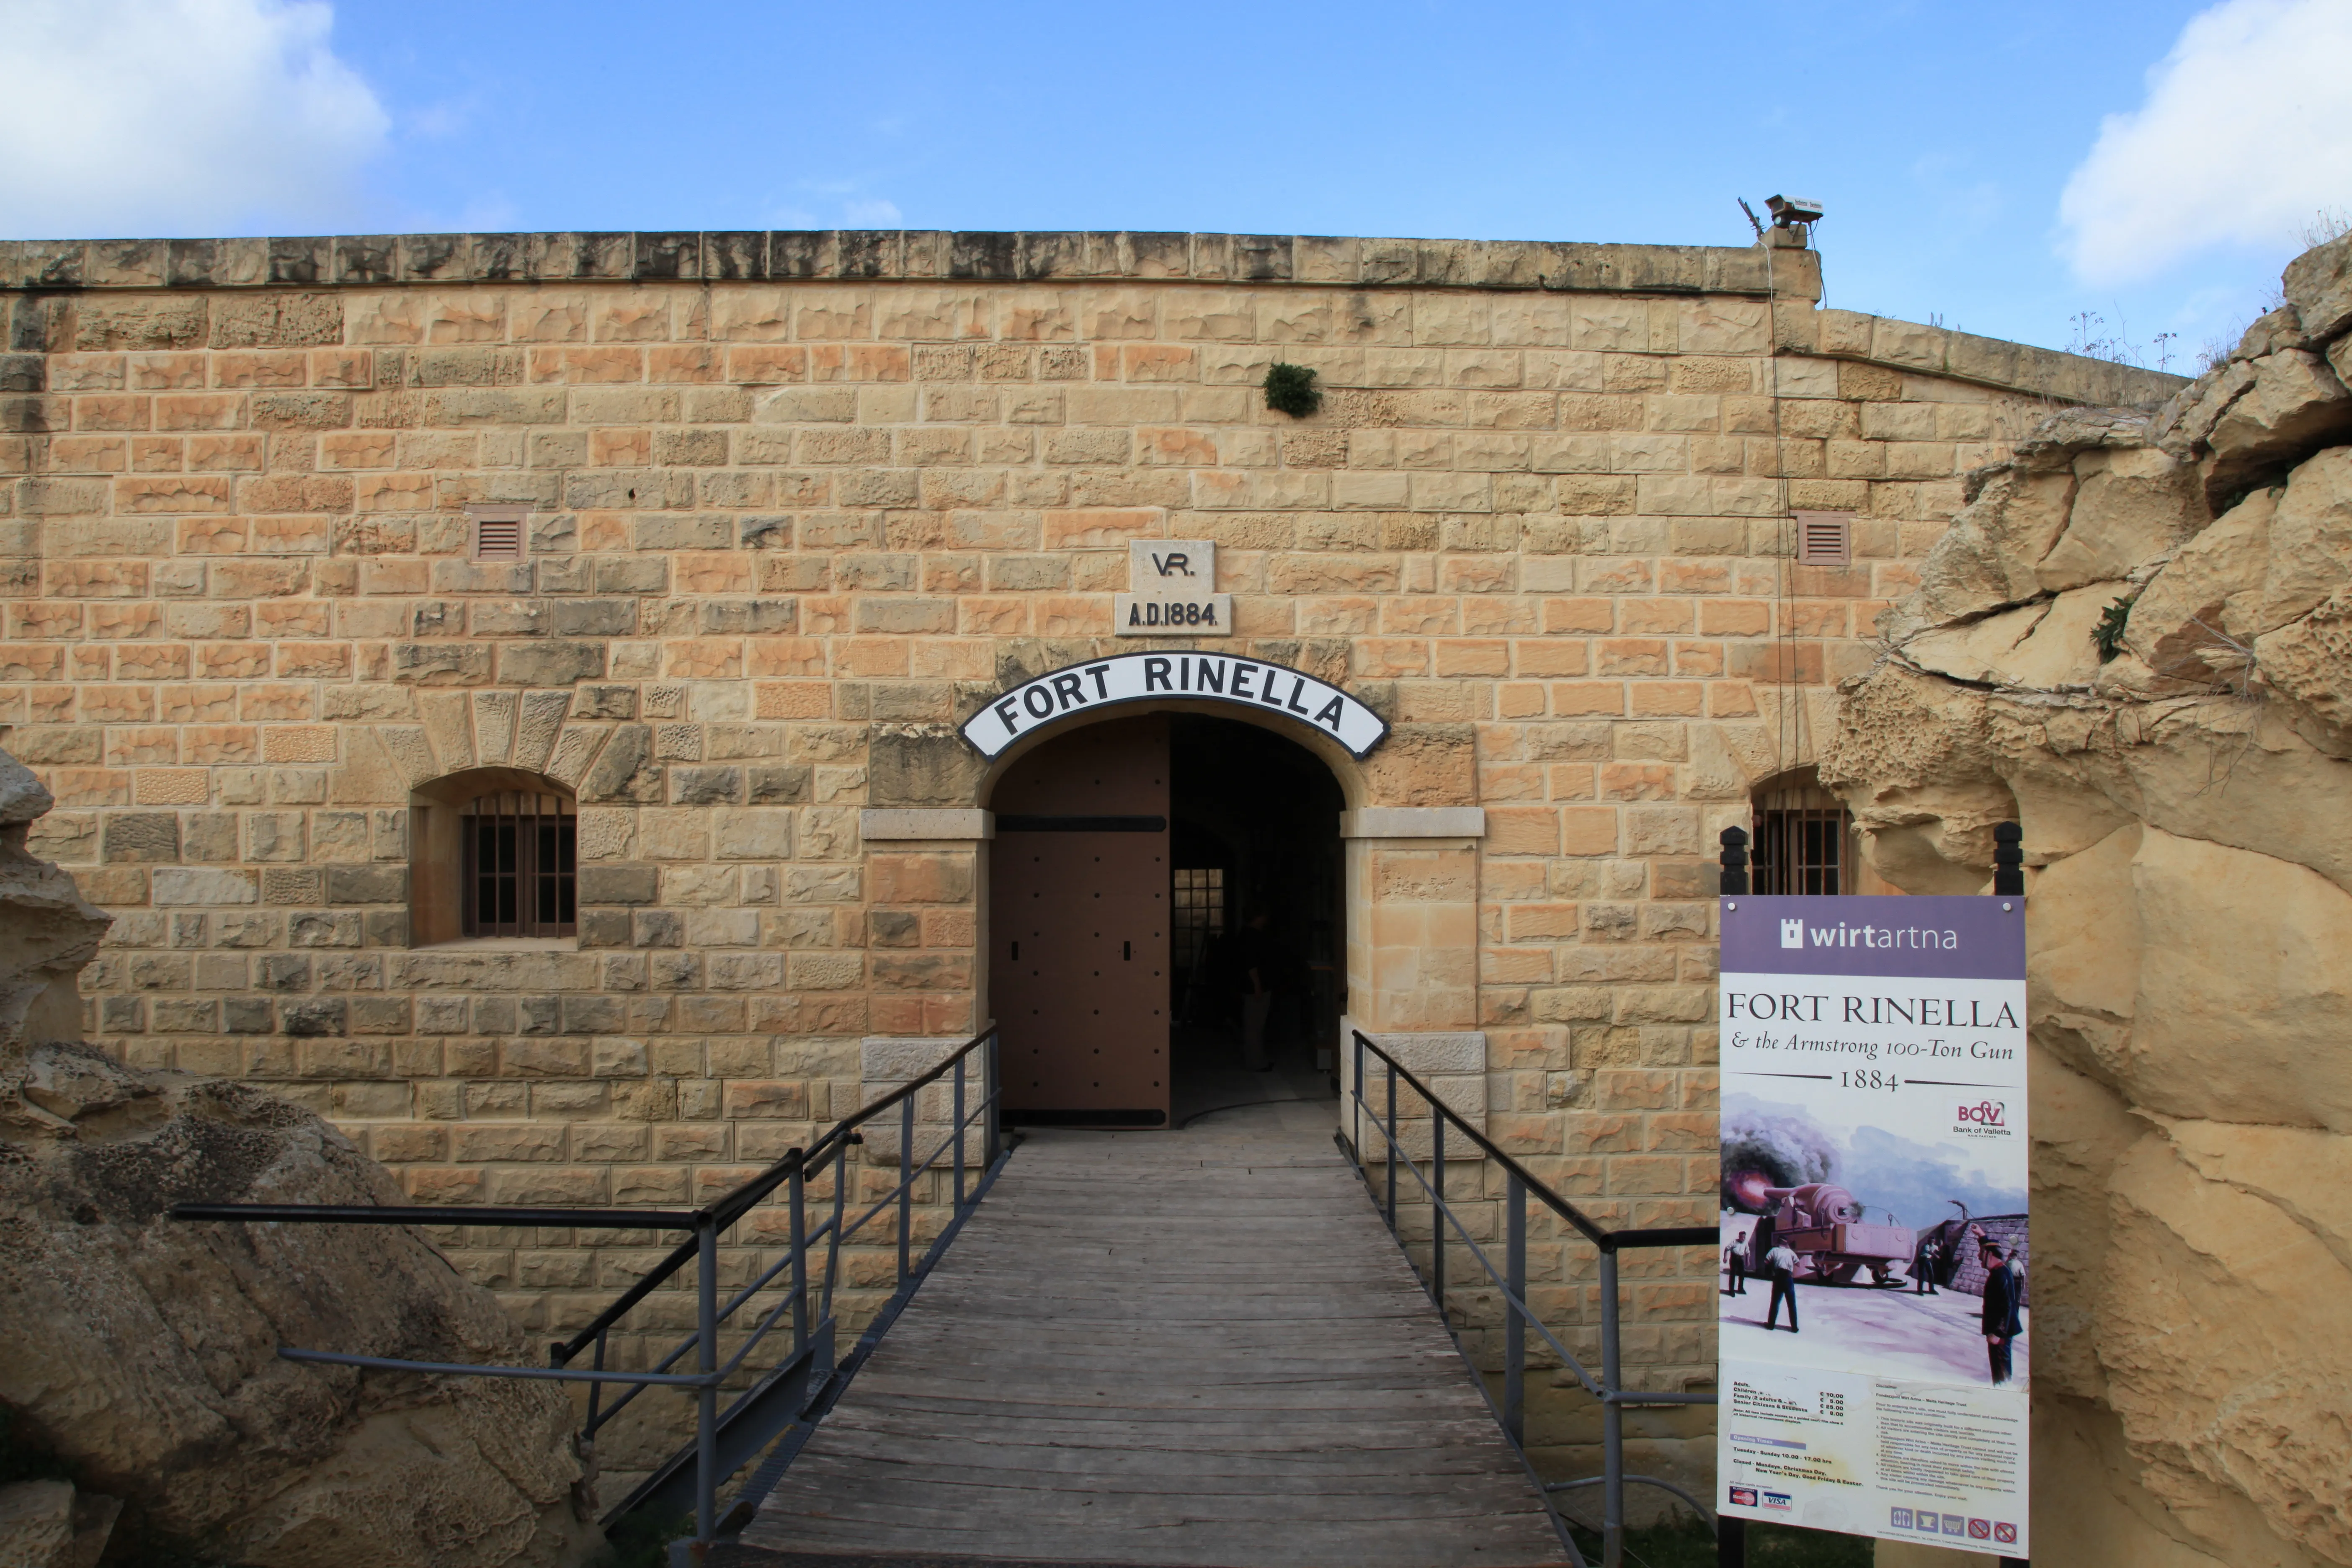 Fort Rinella in Malta, Europe | Architecture - Rated 3.7